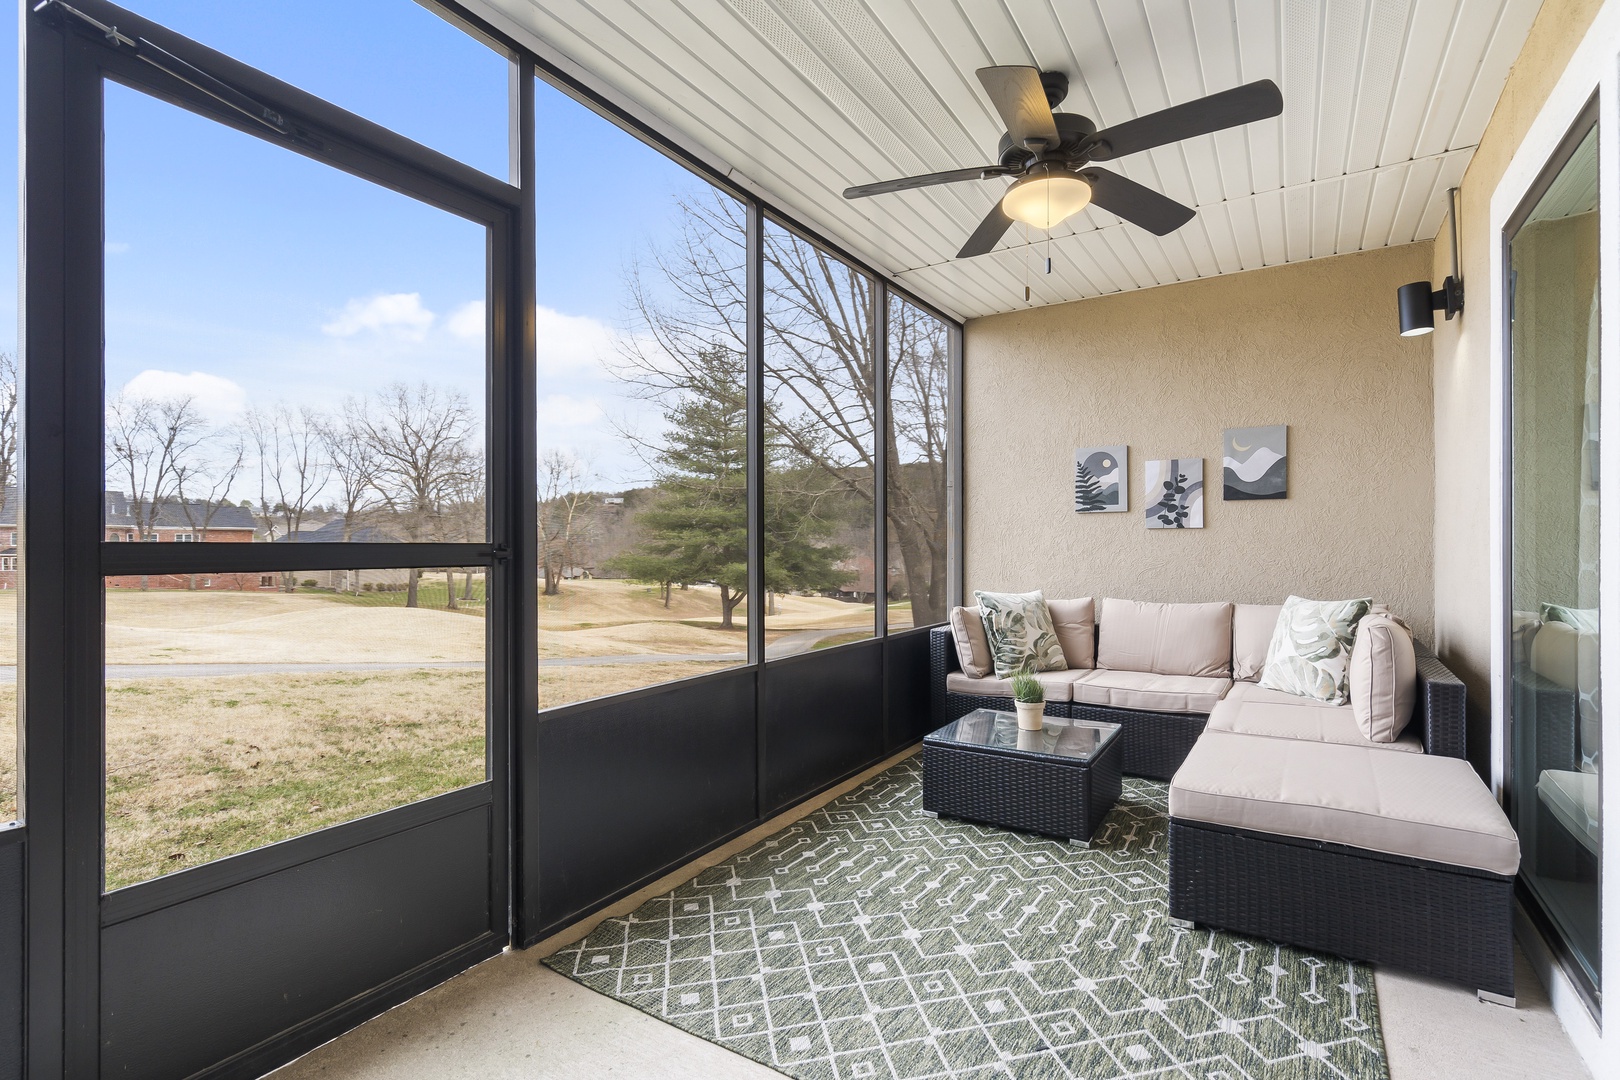 Breathe in the crisp air on the screened patio